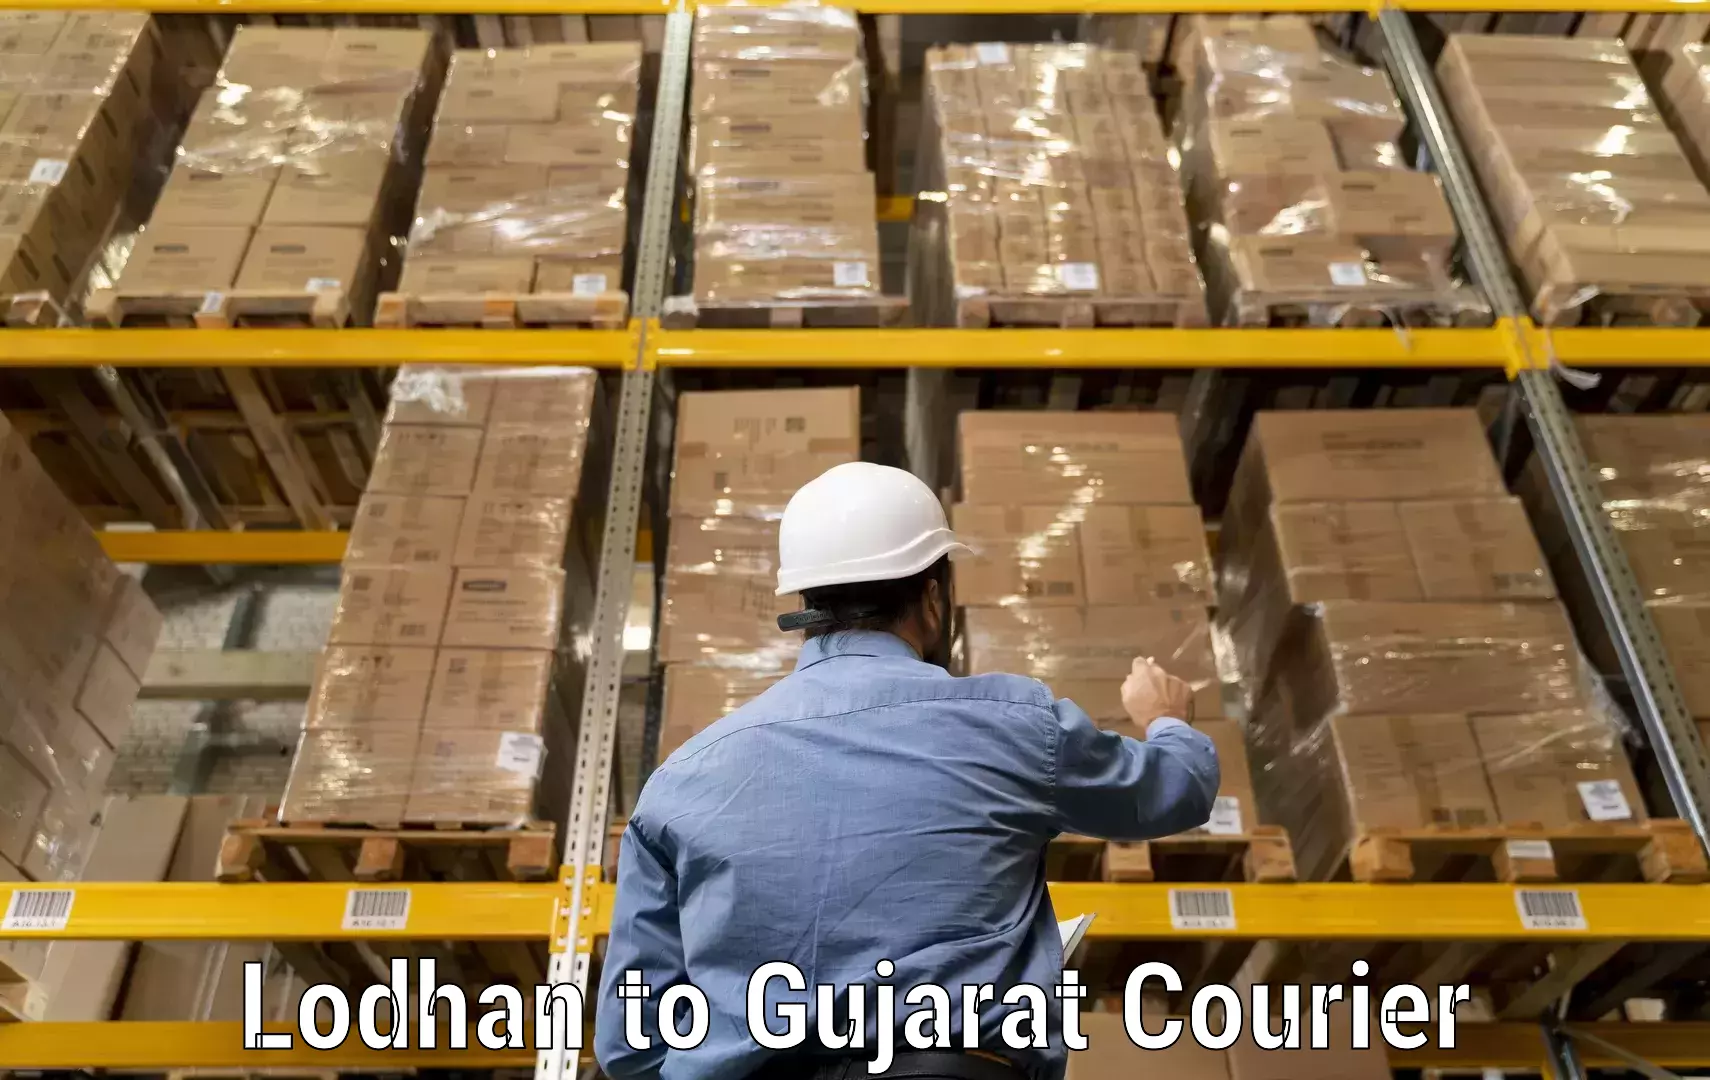 Medical delivery services Lodhan to Gujarat